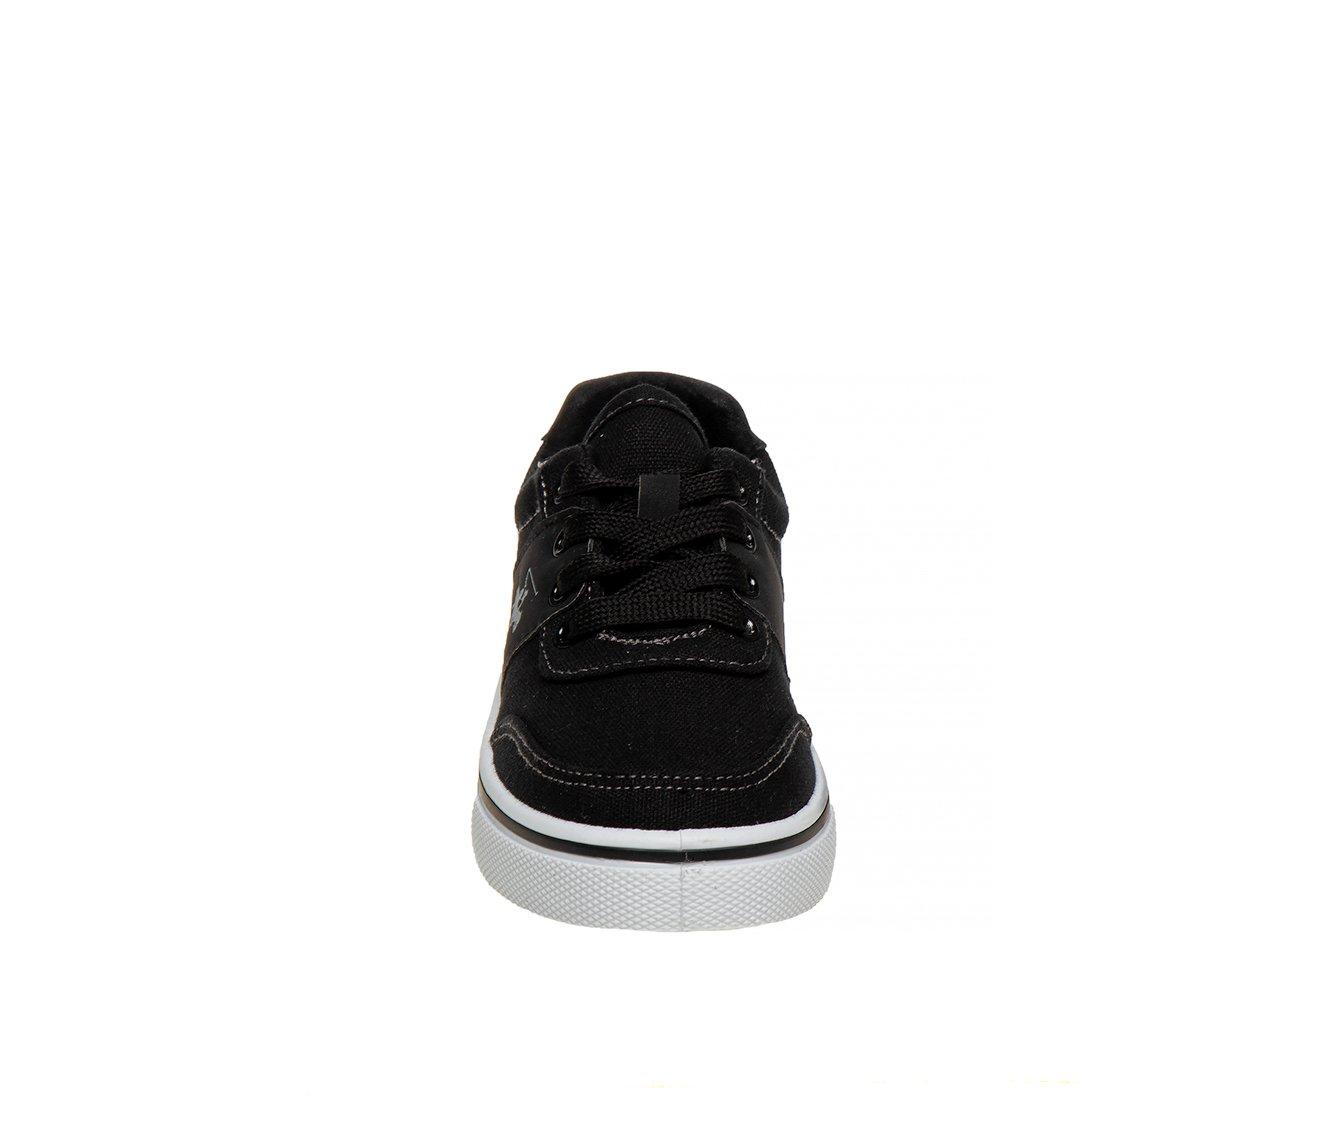 Boys' Beverly Hills Polo Club Little Kid & Big Kid Lace-Up Casual Sneakers